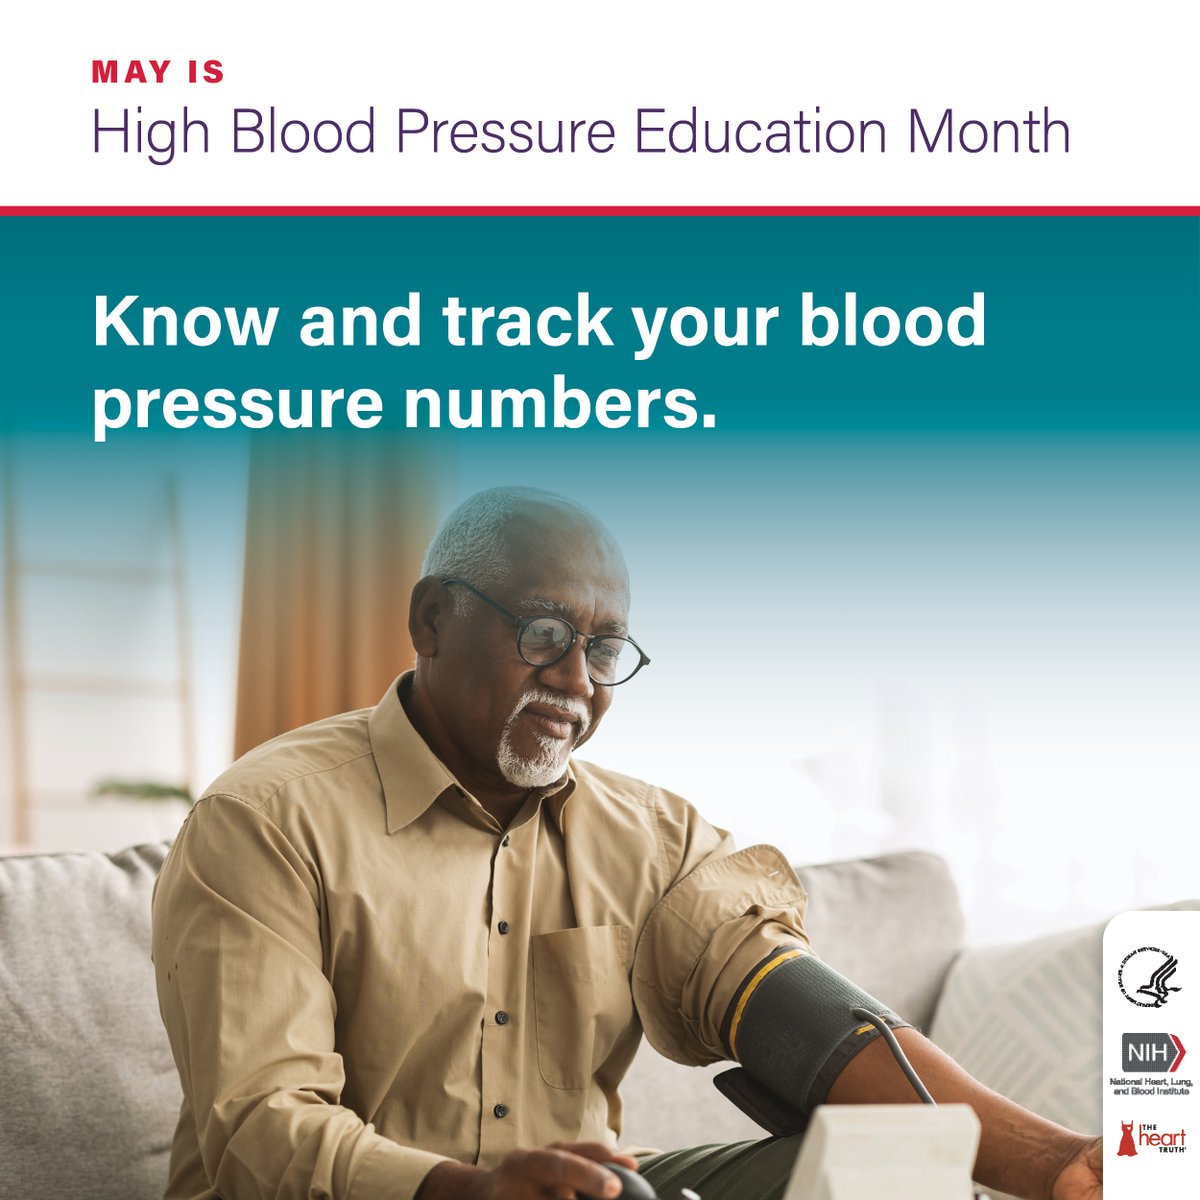 May is #HighBloodPressureMonth! It's important to know how to properly check your blood pressure to get the most accurate results. Knowing and tracking your numbers is an important step to managing high blood pressure. nhlbi.nih.gov/hypertension #HealthierNJ